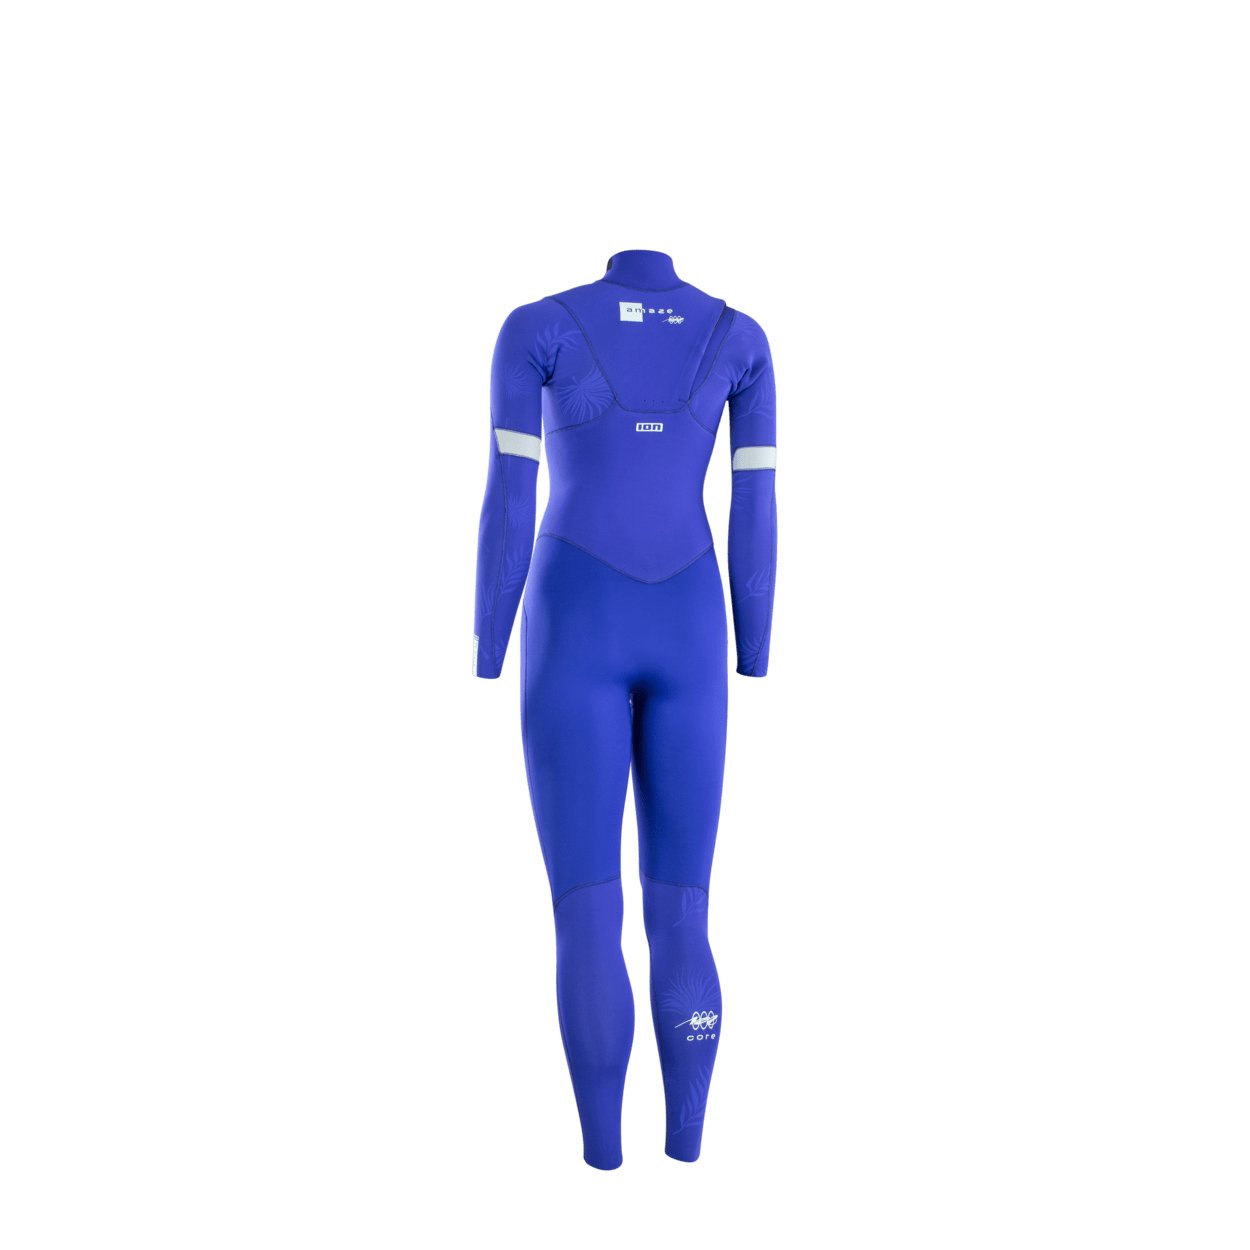 ION Amaze Core 4/3 Front Zip 2022 - Worthing Watersports - 9010583058061 - Wetsuits - ION Water